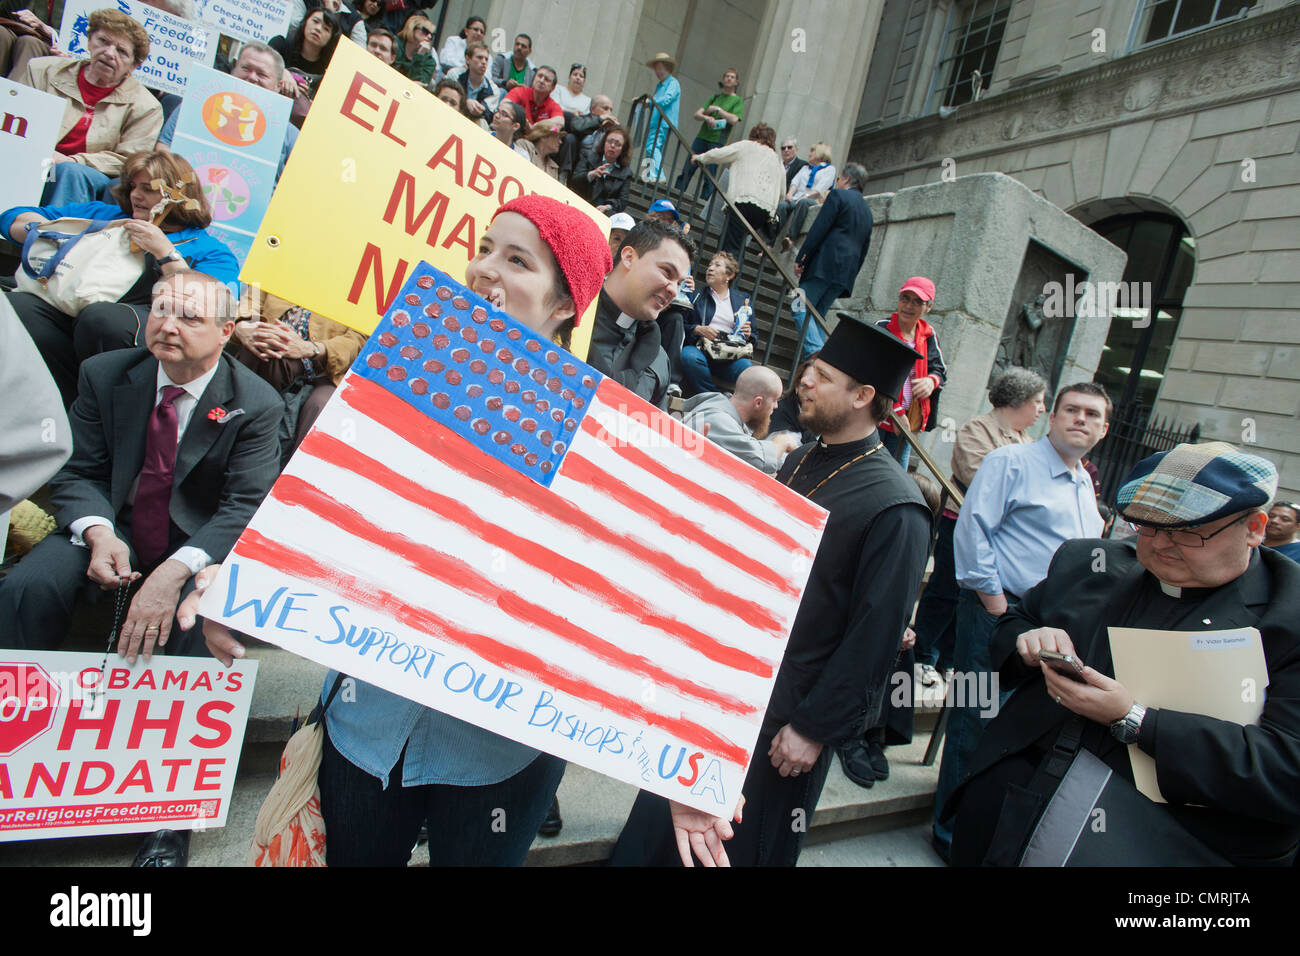 Members of various religious pro-life groups protest in  New York against the implementation of ObamaCare Stock Photo